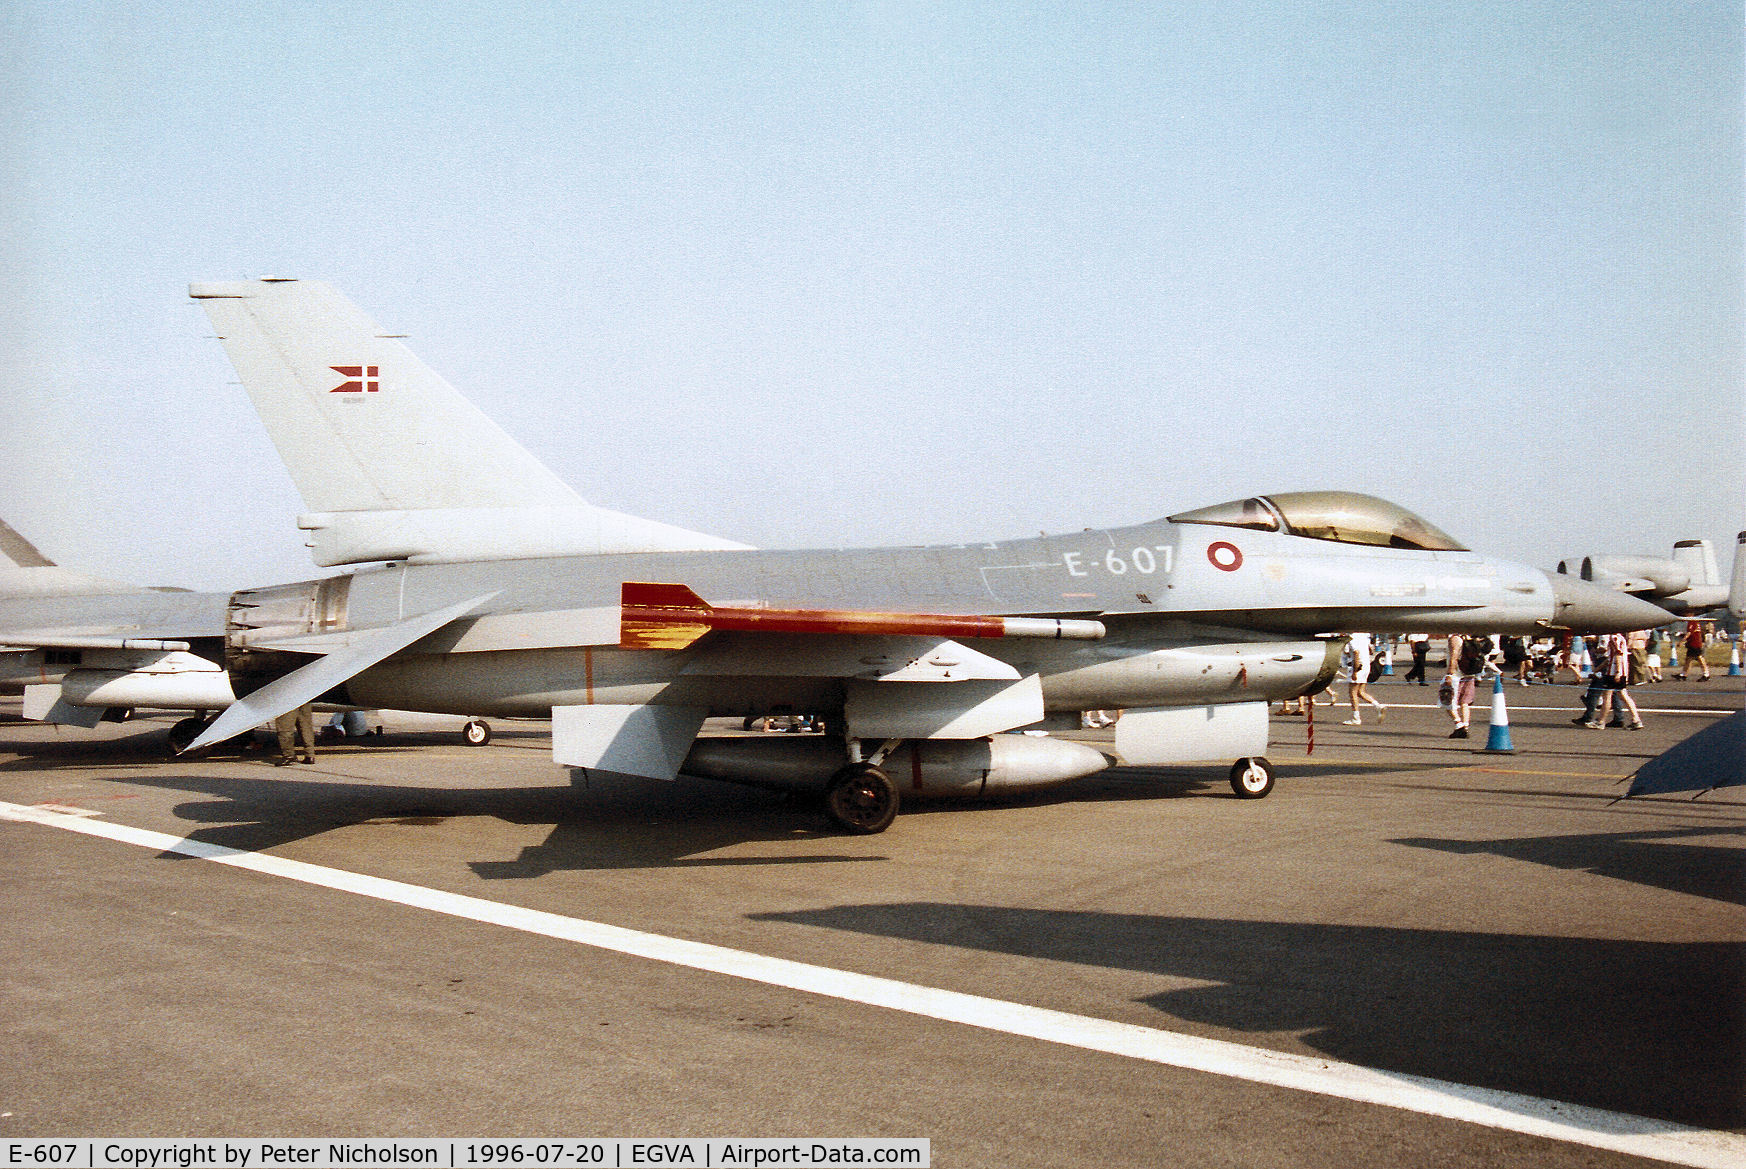 E-607, 1982 SABCA F-16AM Fighting Falcon C/N 6F-42, F-16A Falcon of Eskradille 723 Royal Danish Air Force at Aalborg on display at the 1996 Royal Intnl Air Tattoo at RAF Fairford.